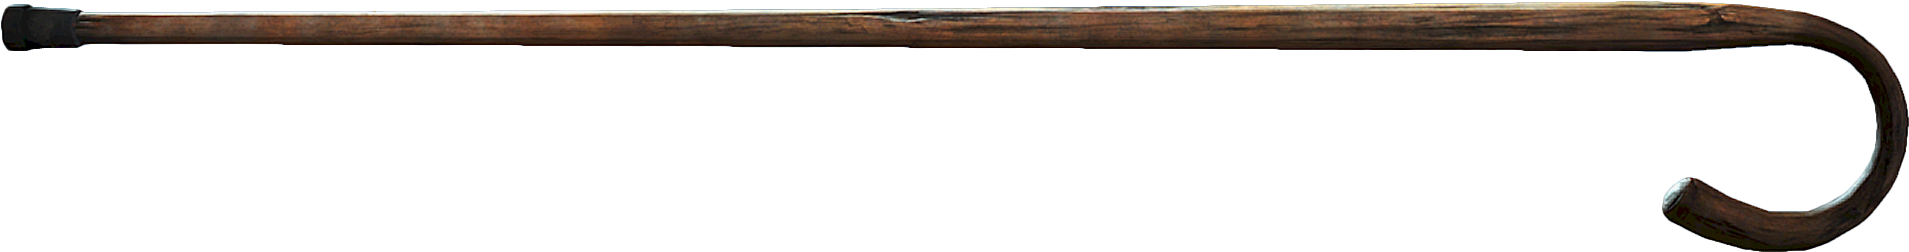 Classic Wooden Walking Stick PNG image